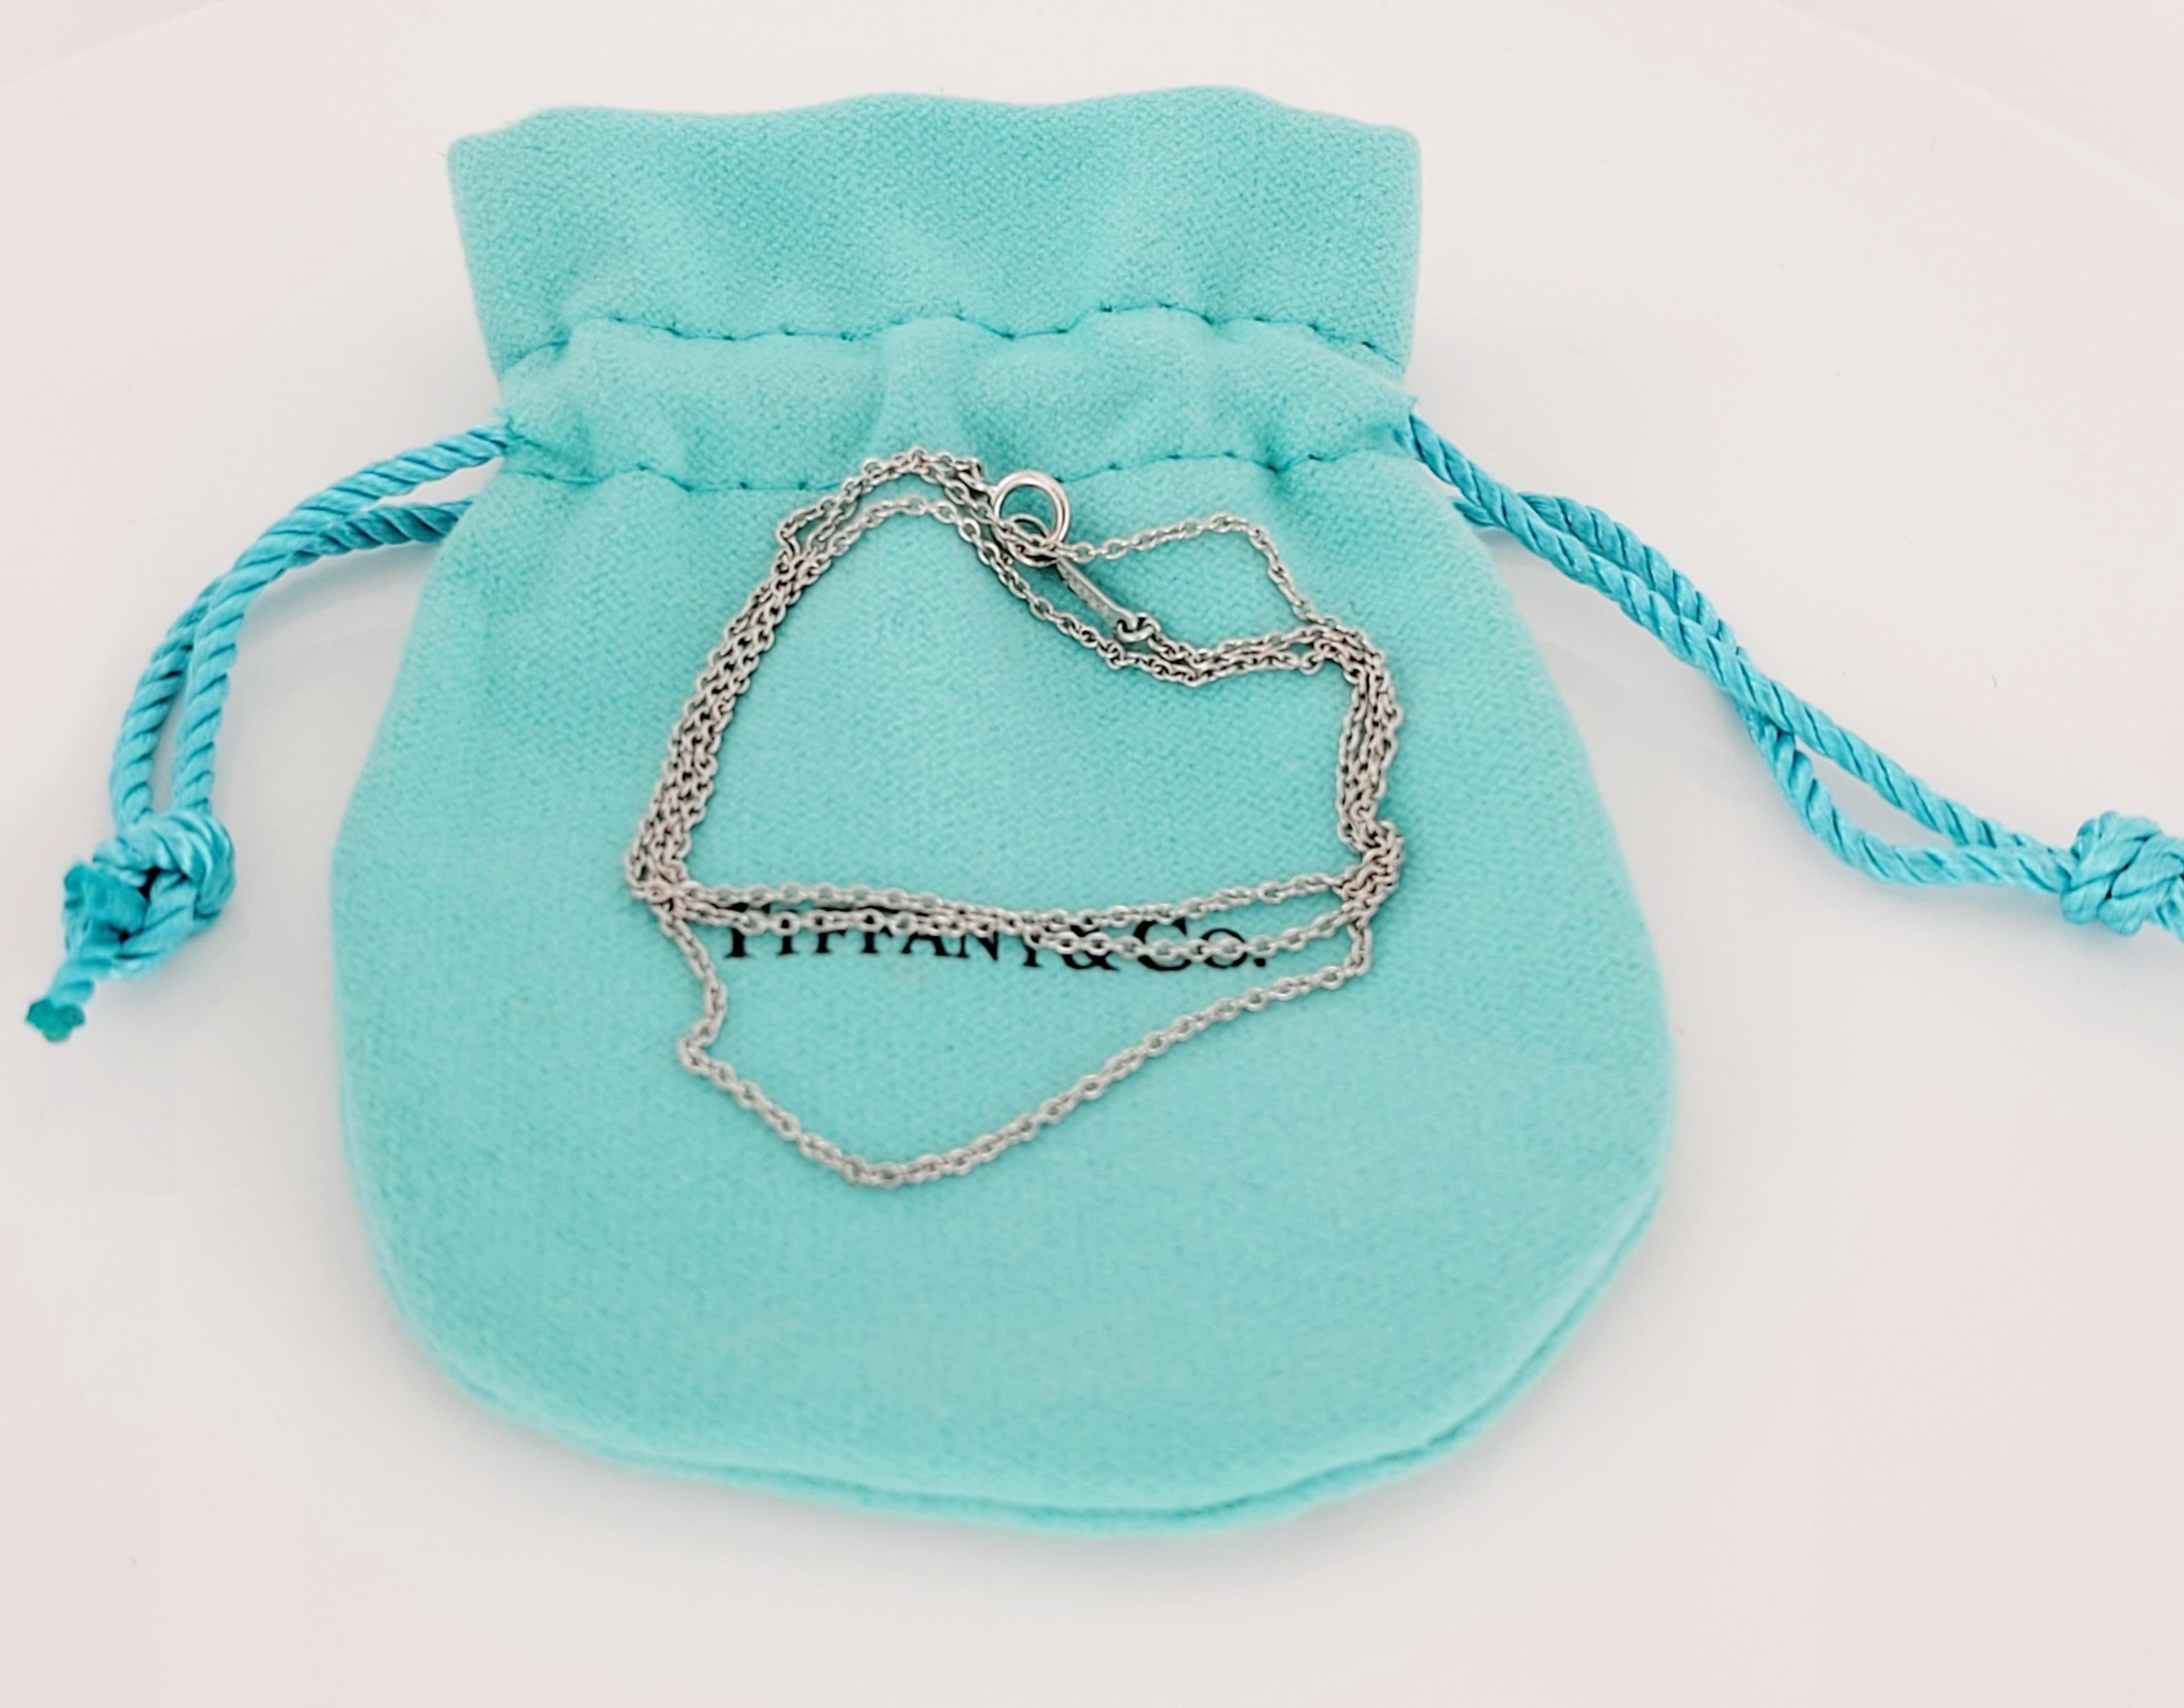 Paloma Picasso Tiffany & co 
Material 18K White gold  
Chain Length 16'' Long
Weight 1.7gr
Condition New, never worn
Comes with Tiffany & co pouch